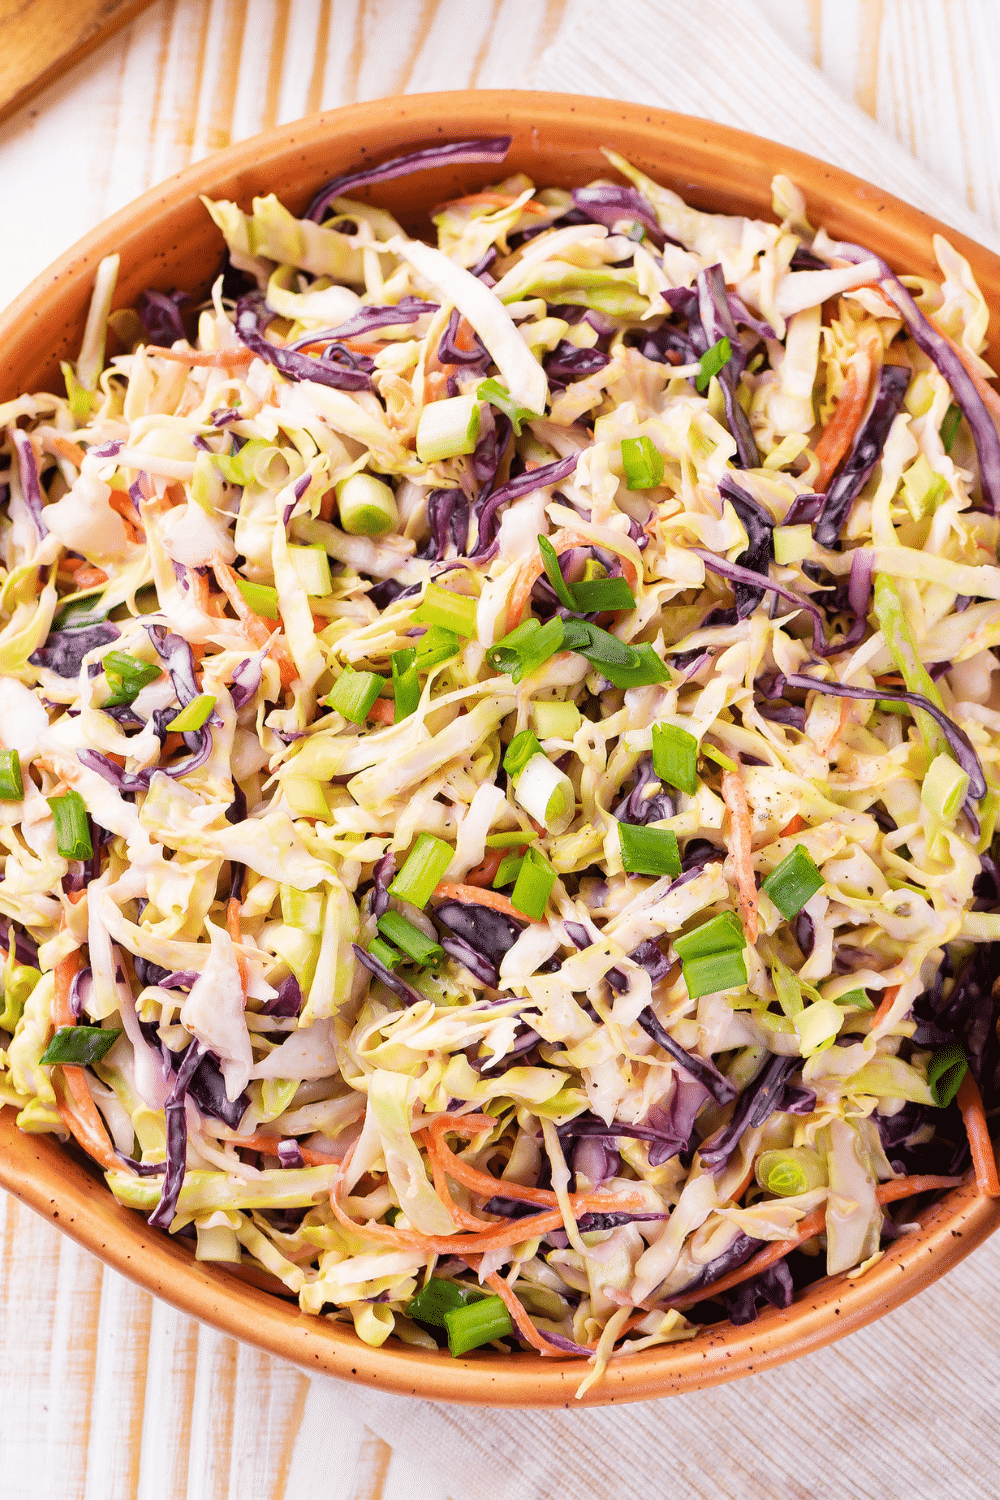 A wooden bowl filled with coleslaw.